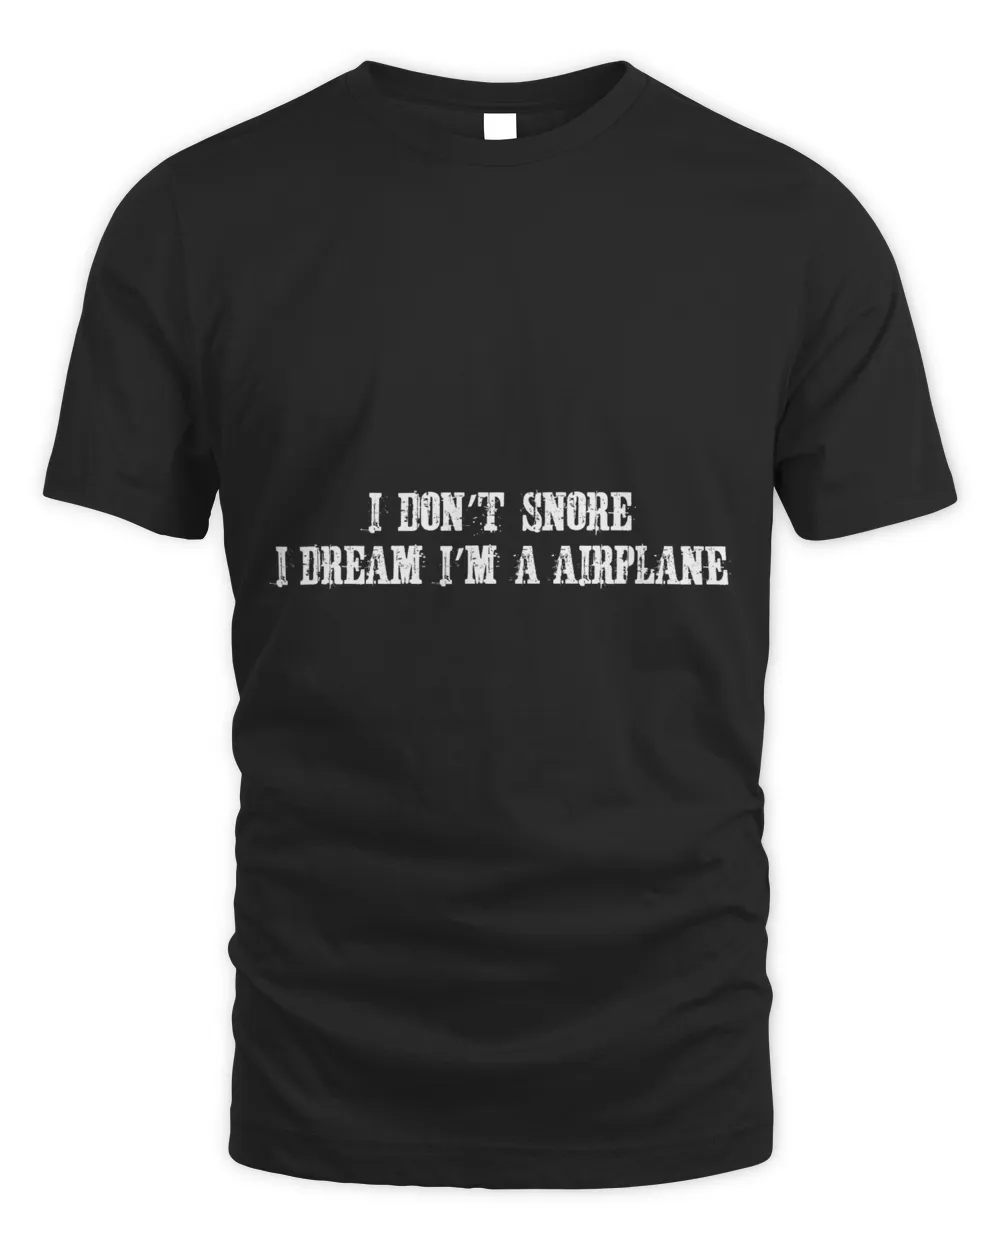 I don't snore I dream I'm a airplane